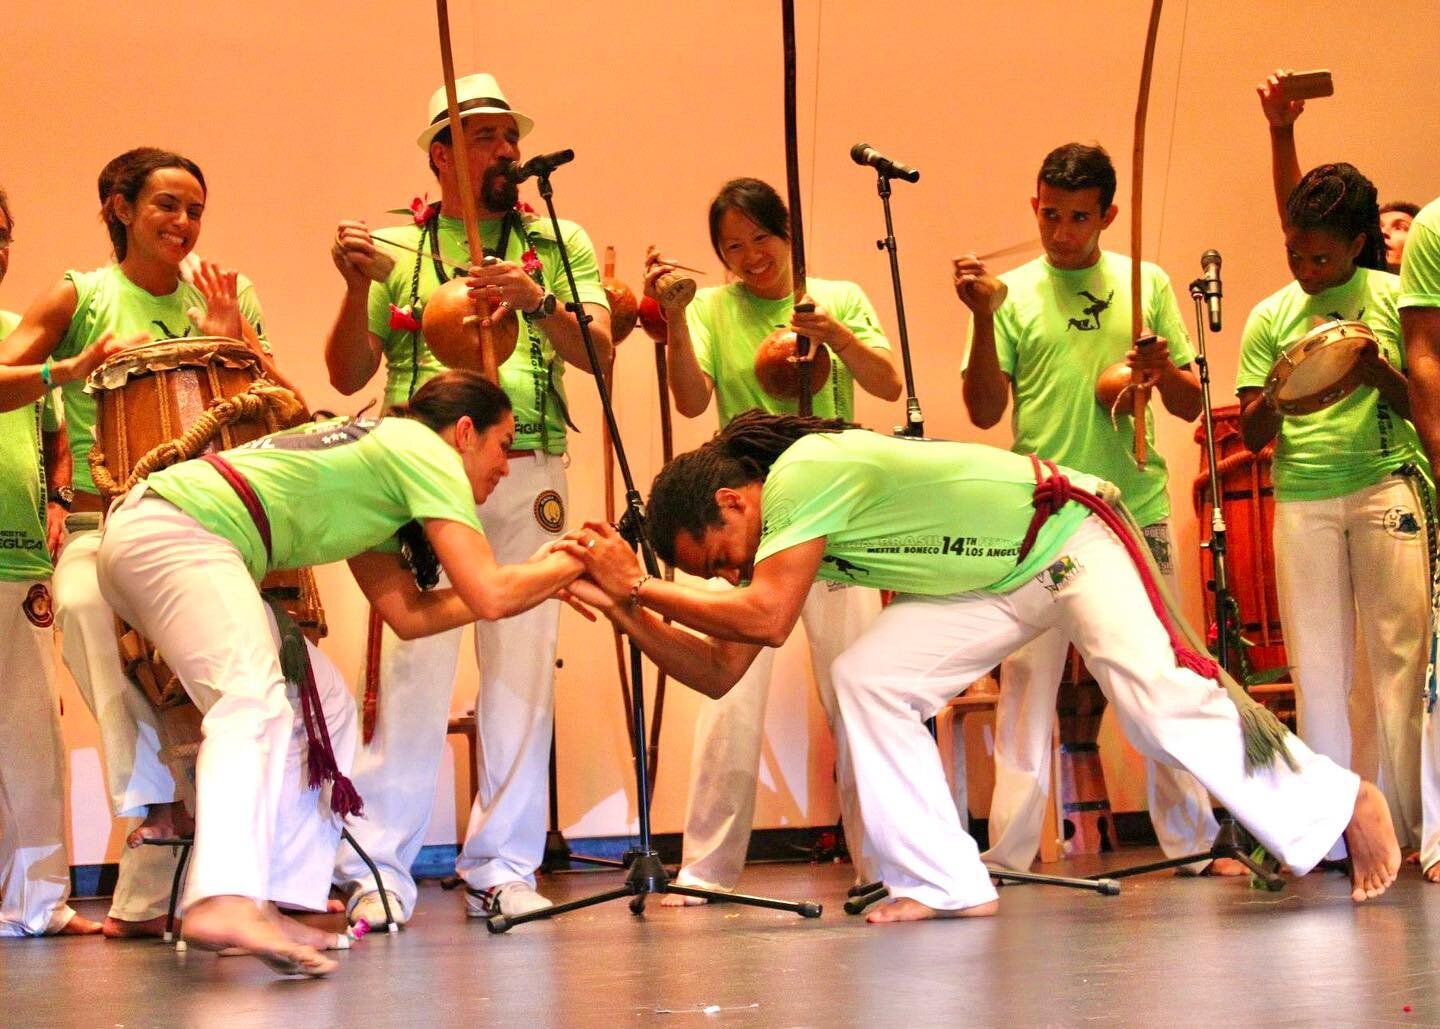 Part of what I love about capoeira is witnessing and being part of my fellow capoeira brothers&rsquo; and sisters&rsquo; journey and evolution ✨🤸&zwj;♂️🤸🏽✨

Capoeira is deeply transformational and the power of community is a precious gift&hellip;a